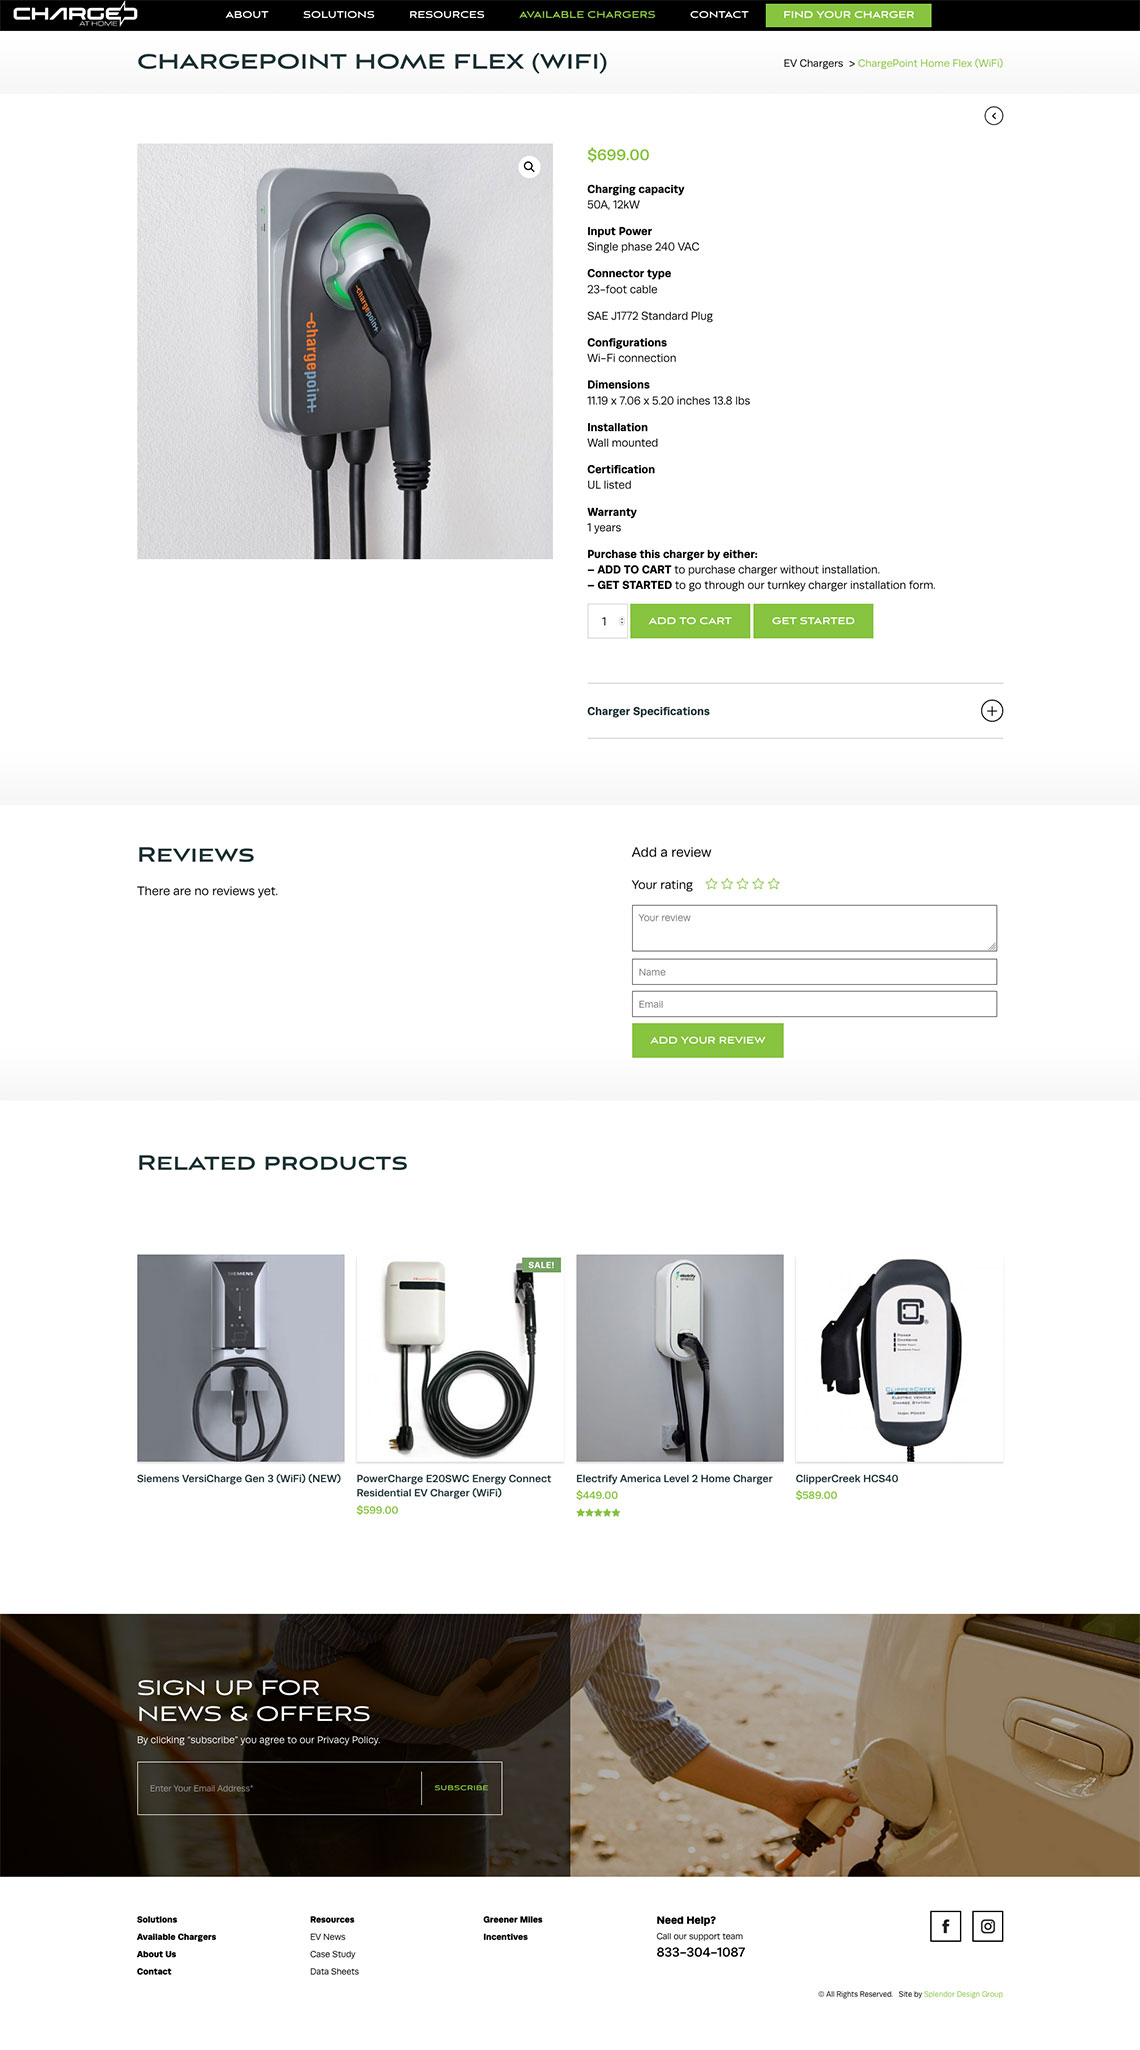 Charged At Home EV Ecommerce Site